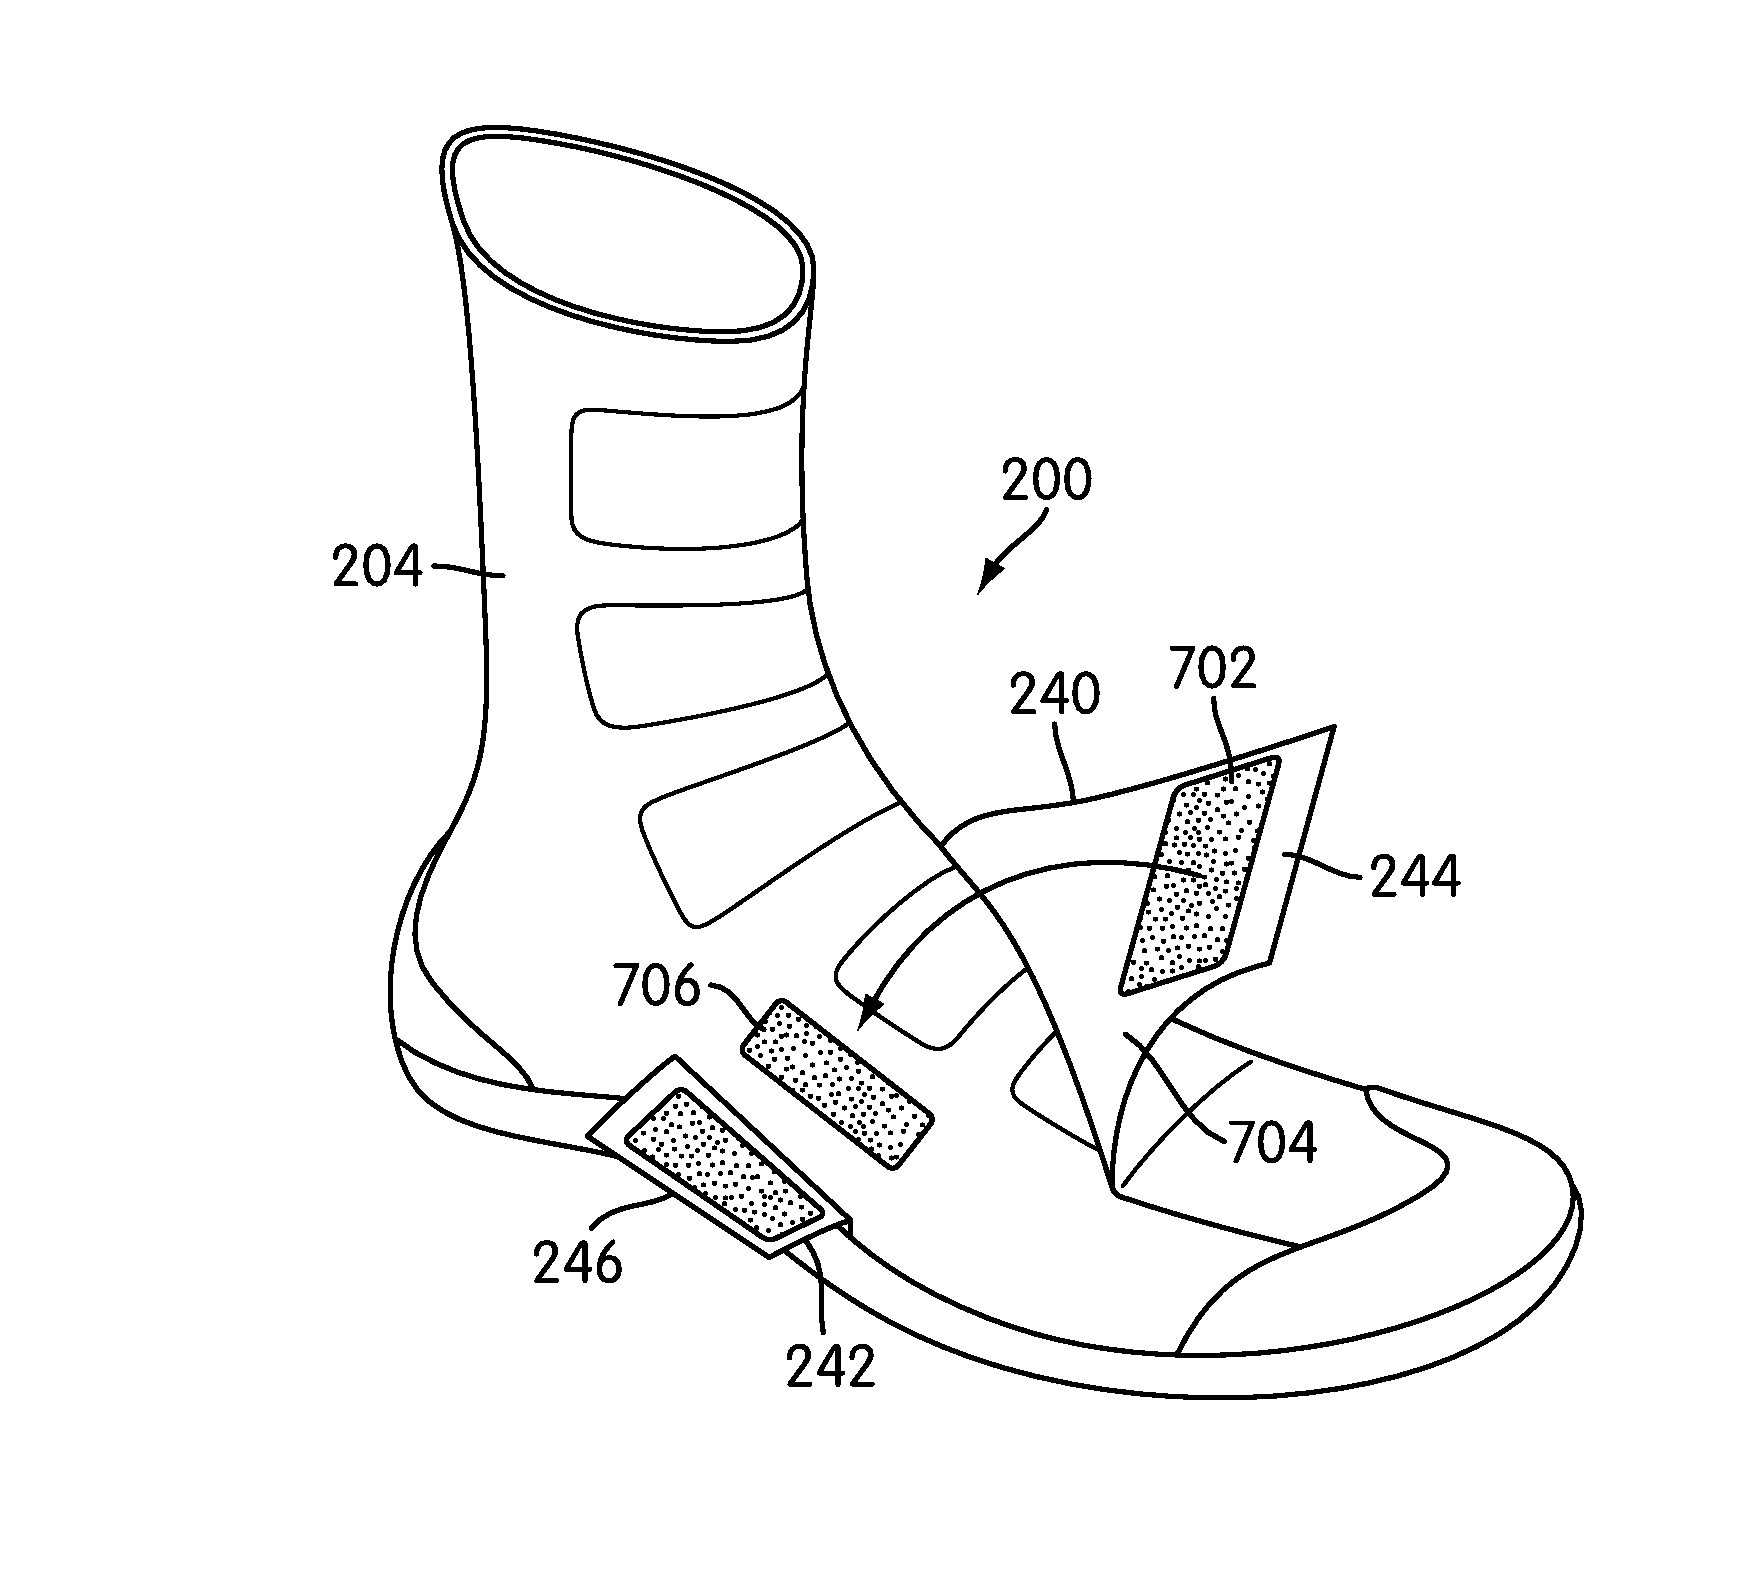 Article of Footwear for Water Sports